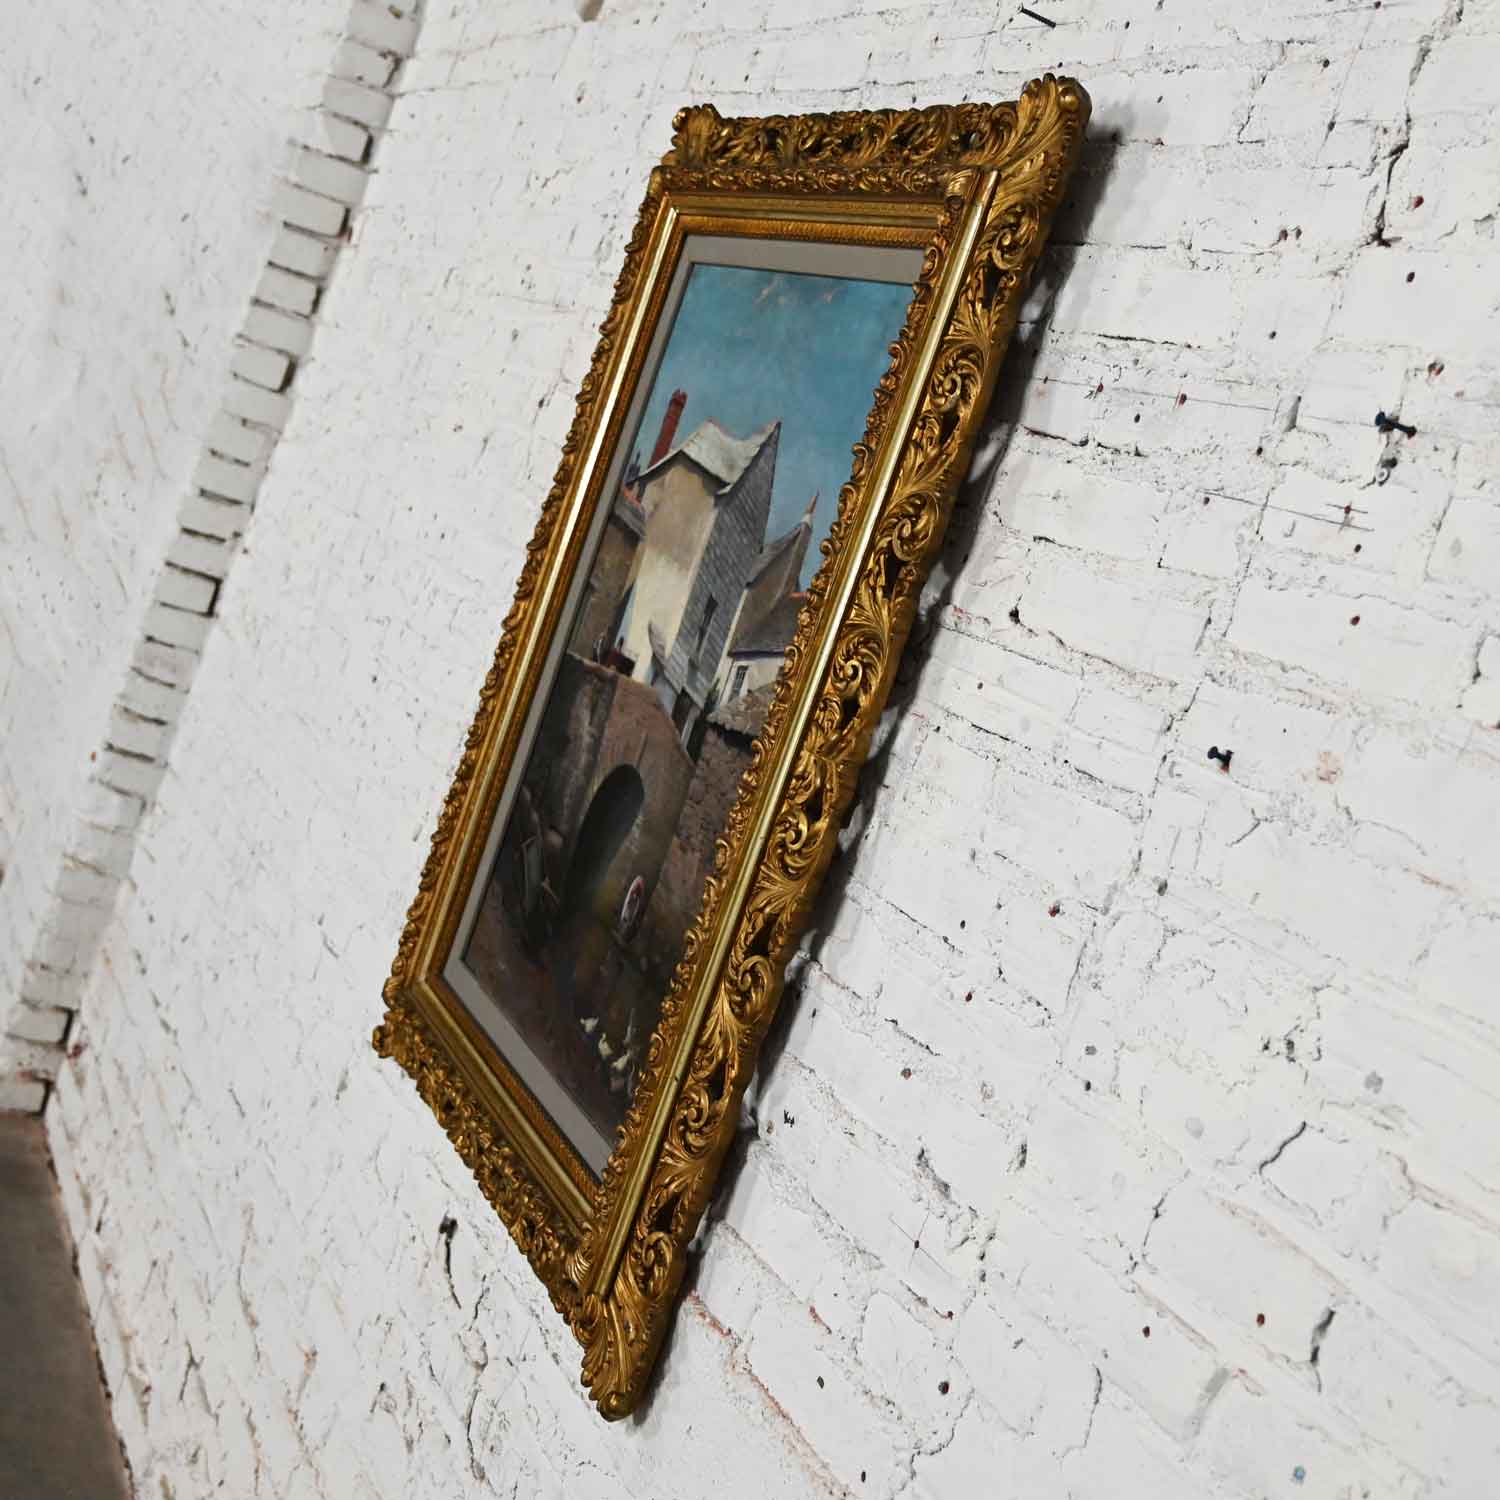 Antique Realism Landscape Oil Painting by Hely Smith Titled Polperro Original Gilded Baroque Frame Dated 1896